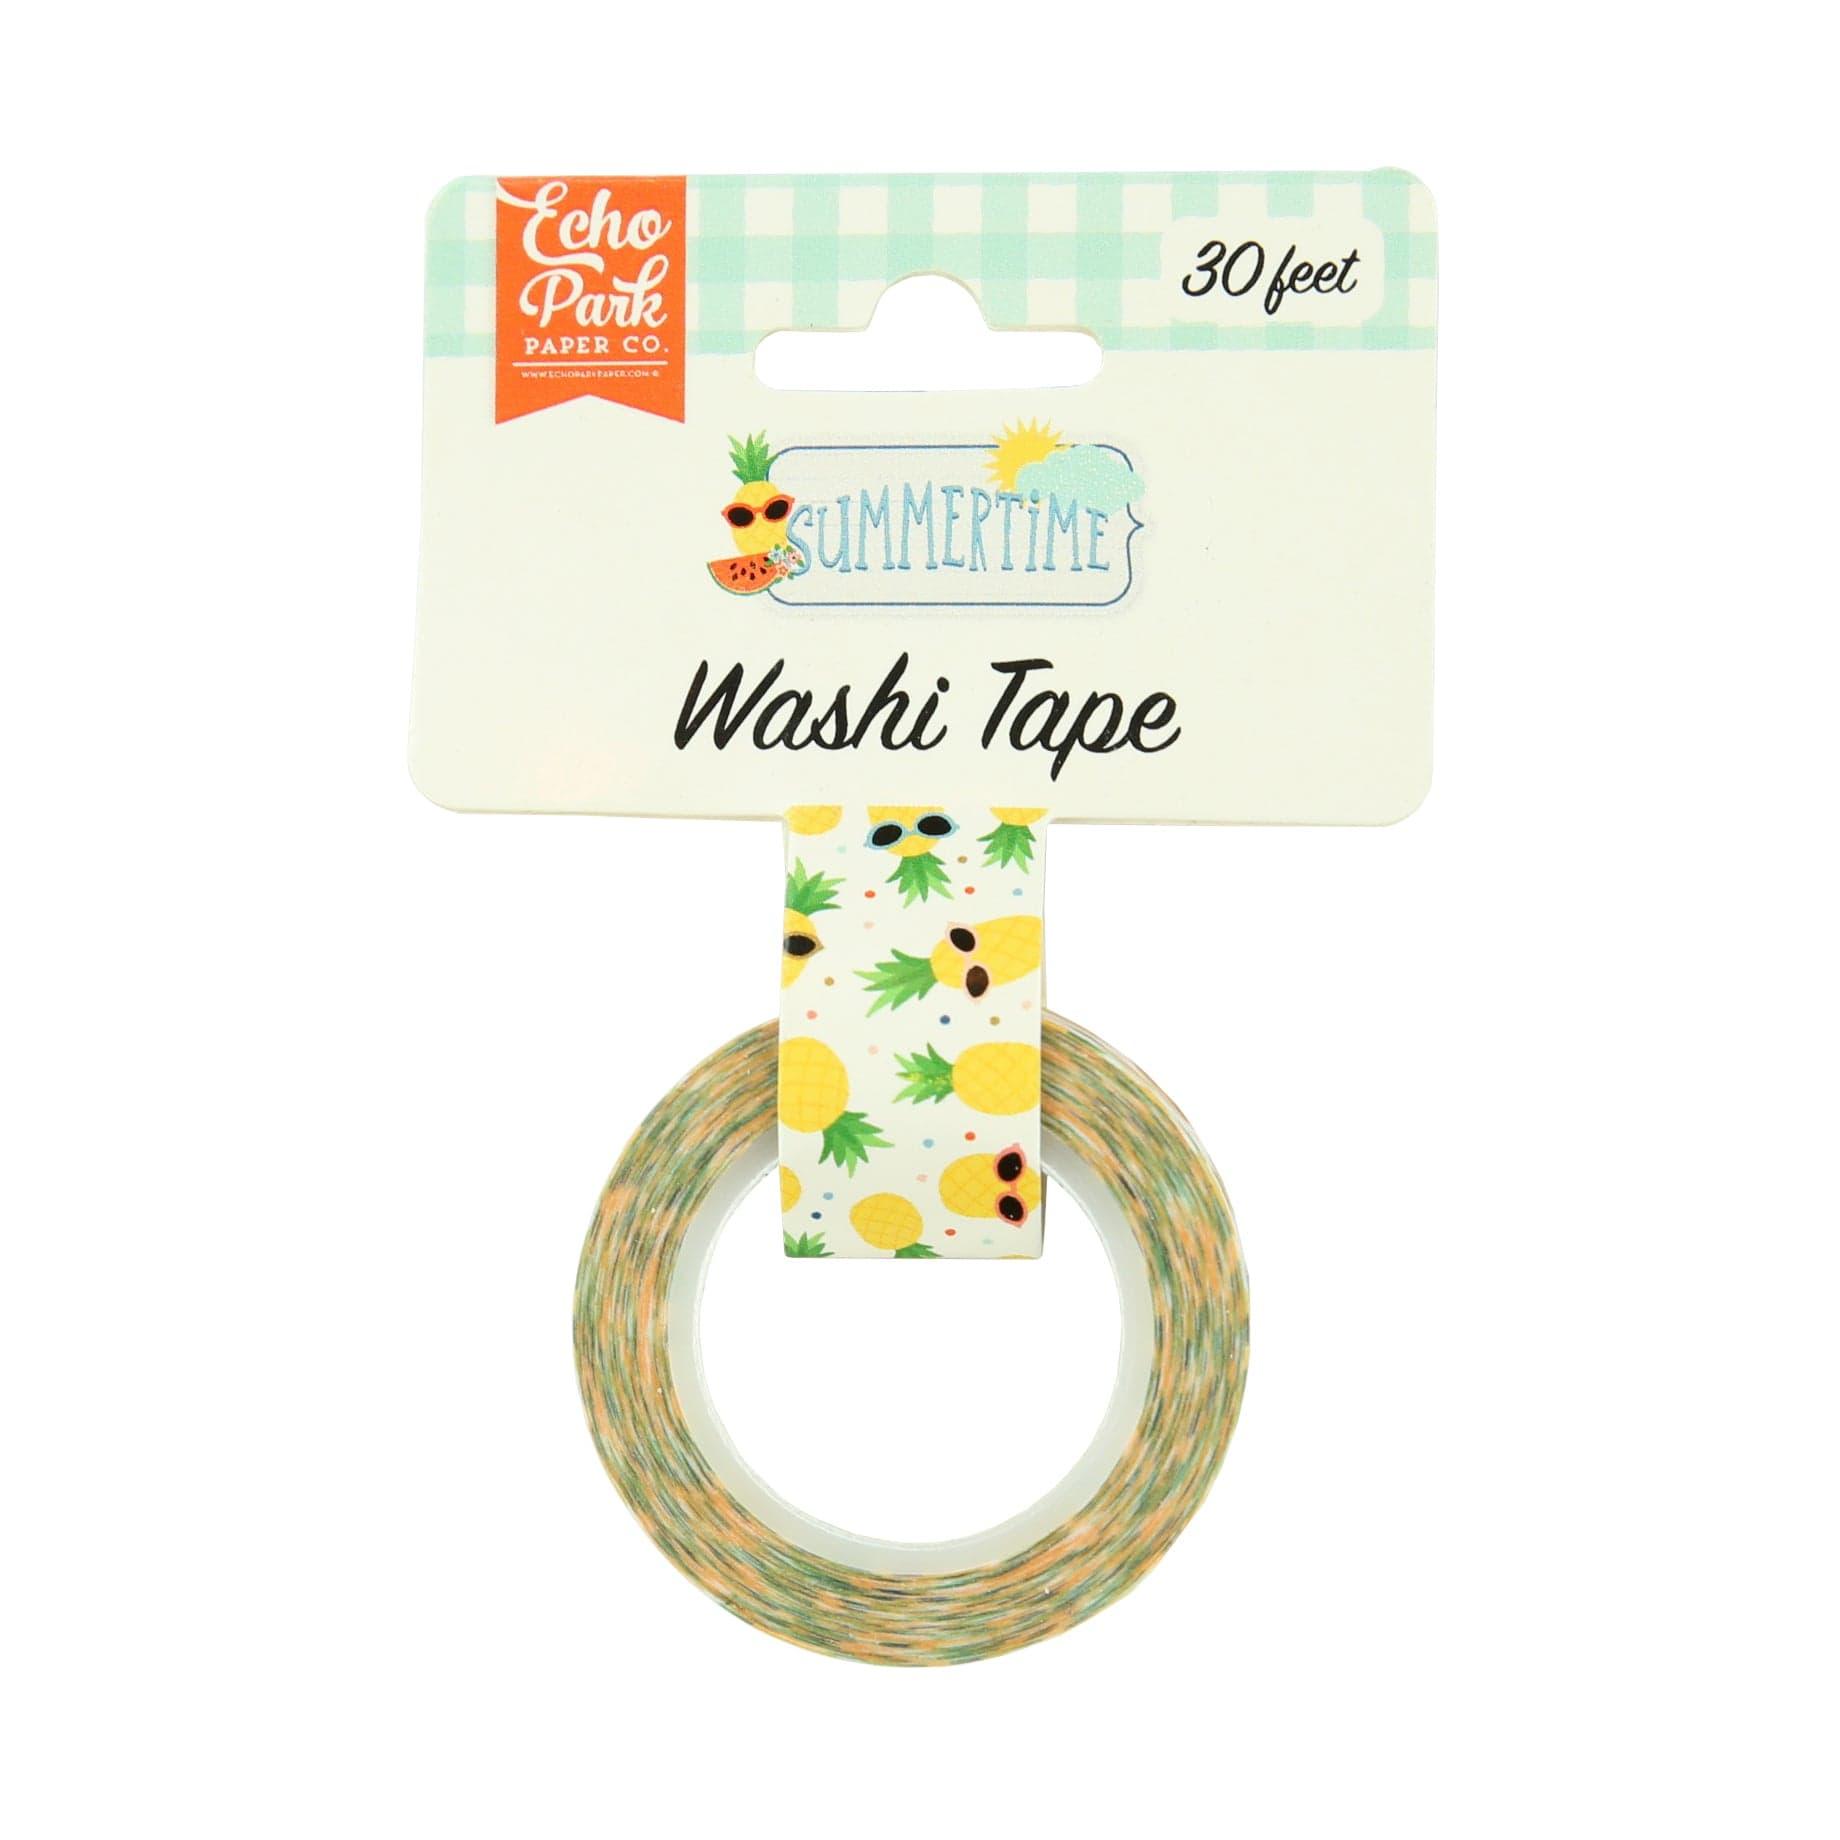 Summertime Collection Cool Pineapples Scrapbook Washi Tape by Echo Park Paper - 30 Feet - Scrapbook Supply Companies